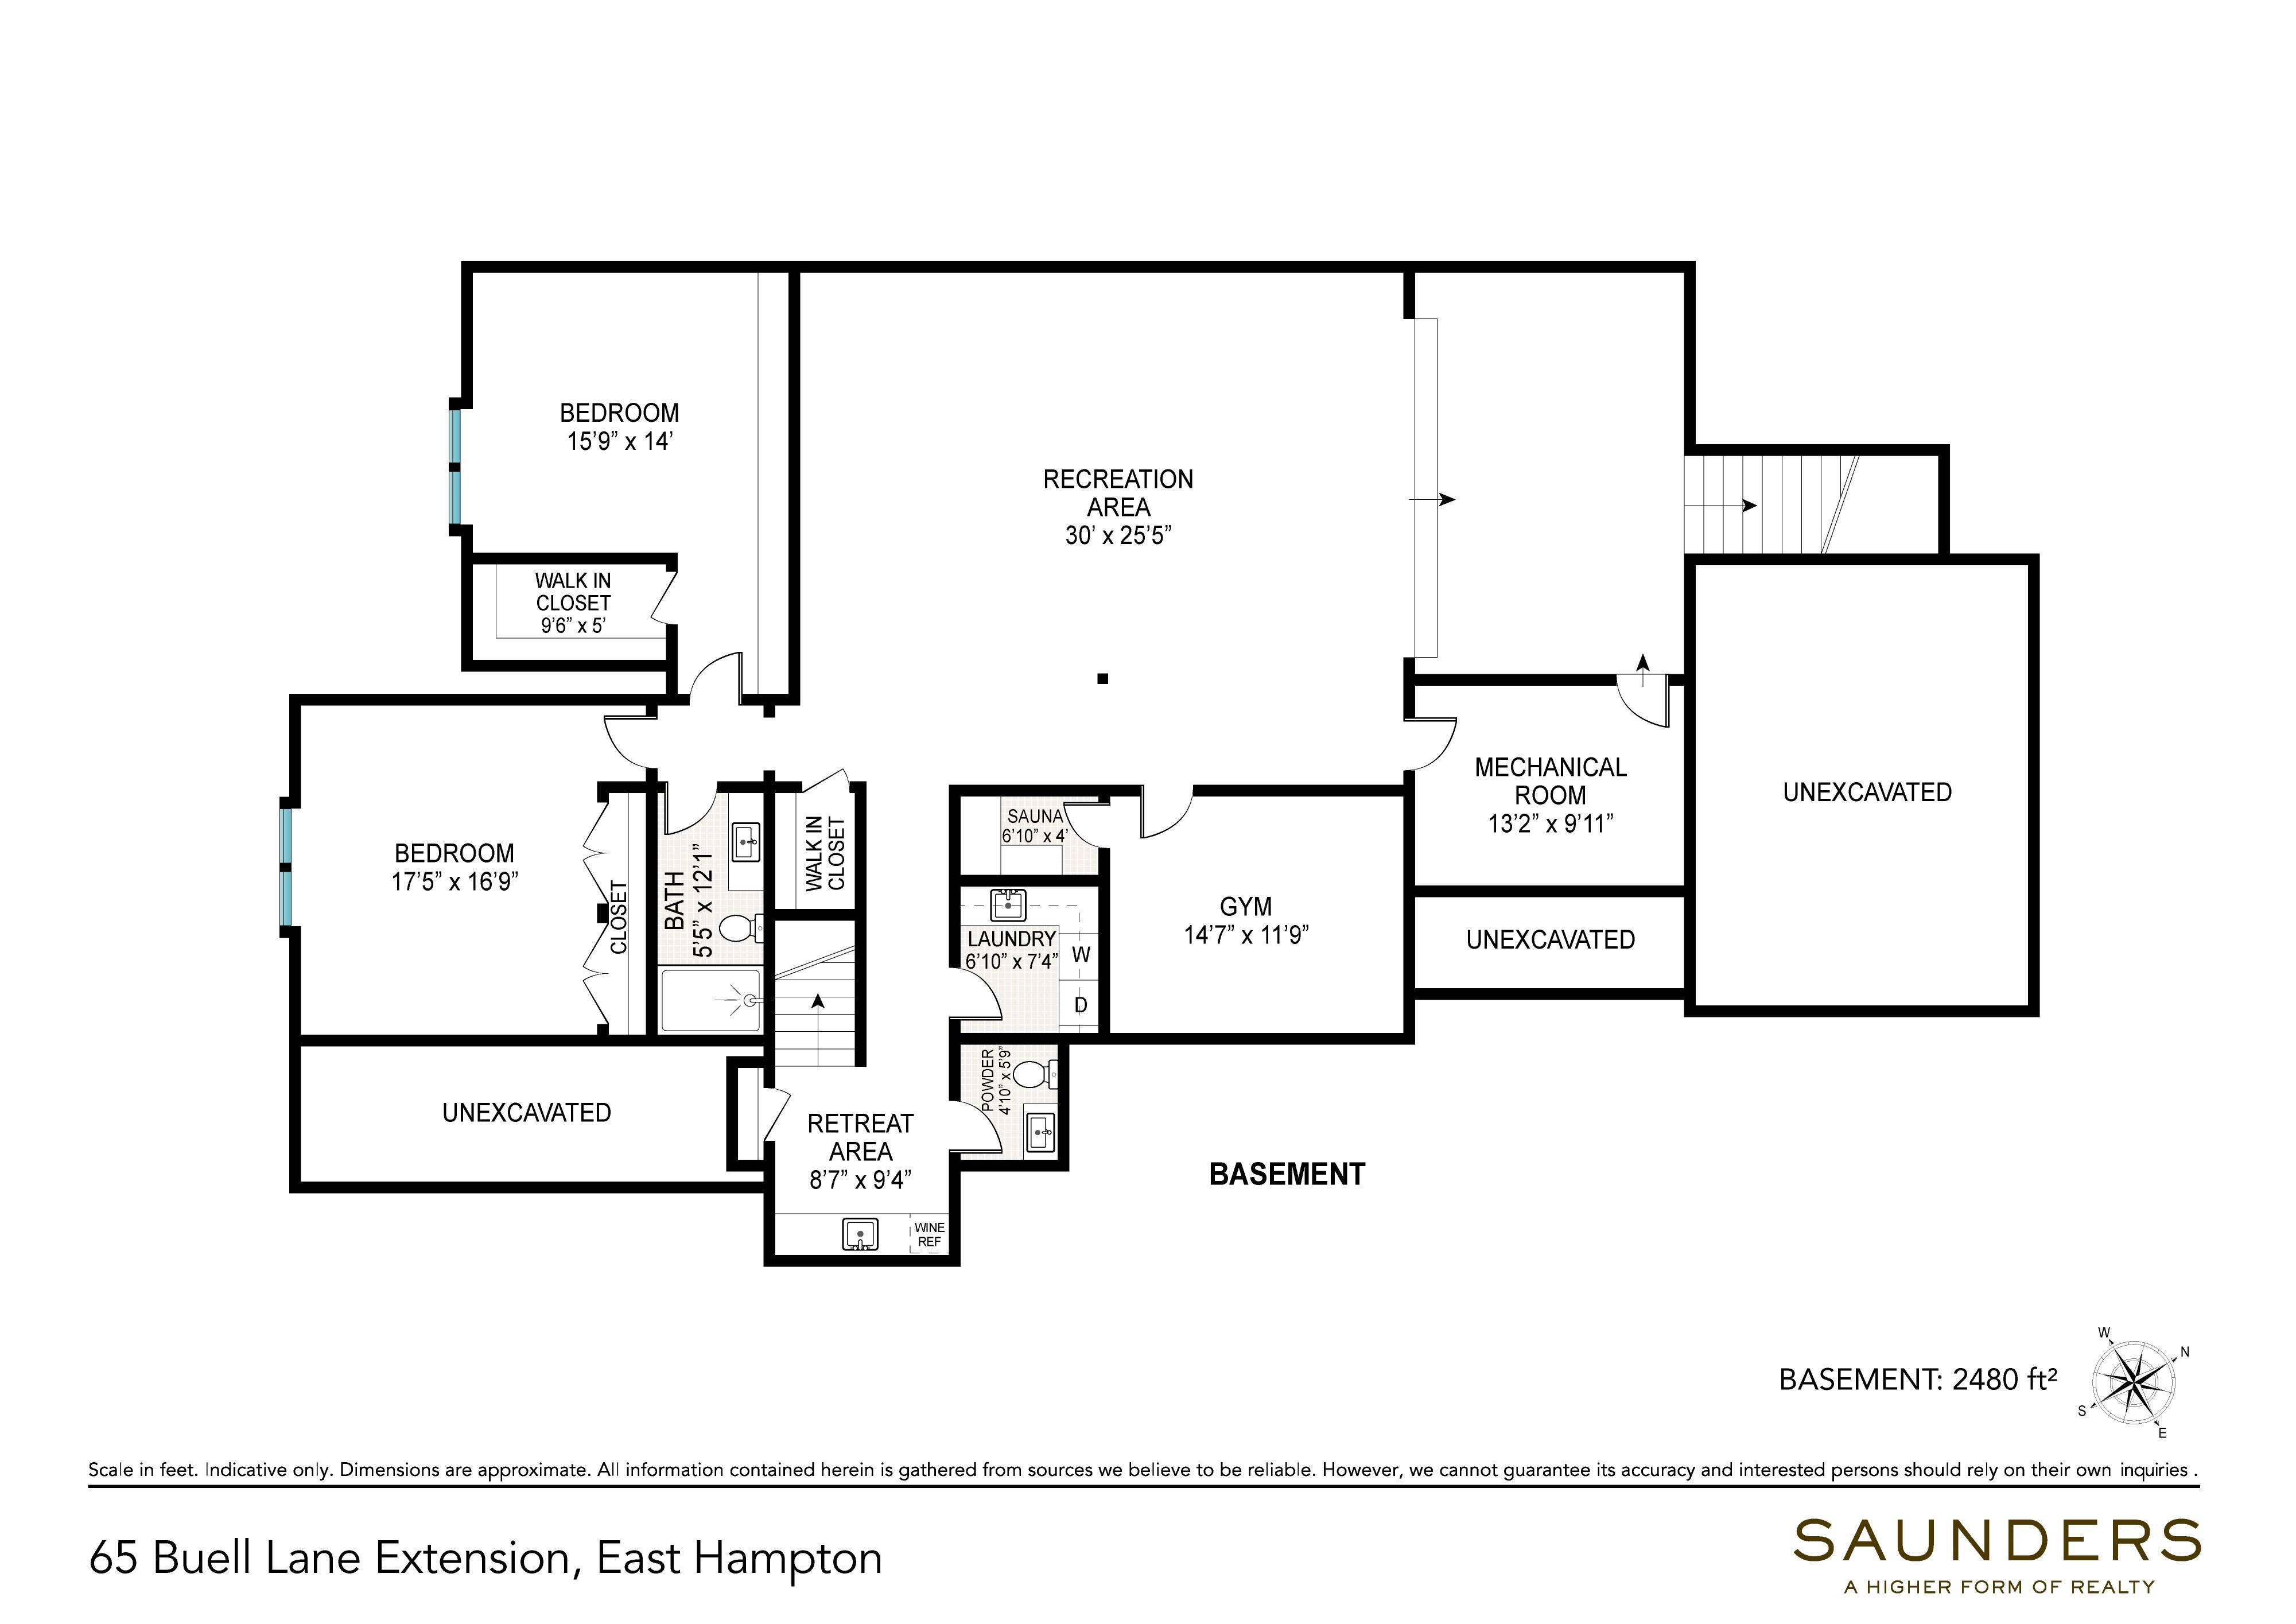 Single Family Homes for Sale at Next-Level New Construction, Ready Now 65 Buell Lane Extension, East Hampton, NY 11937